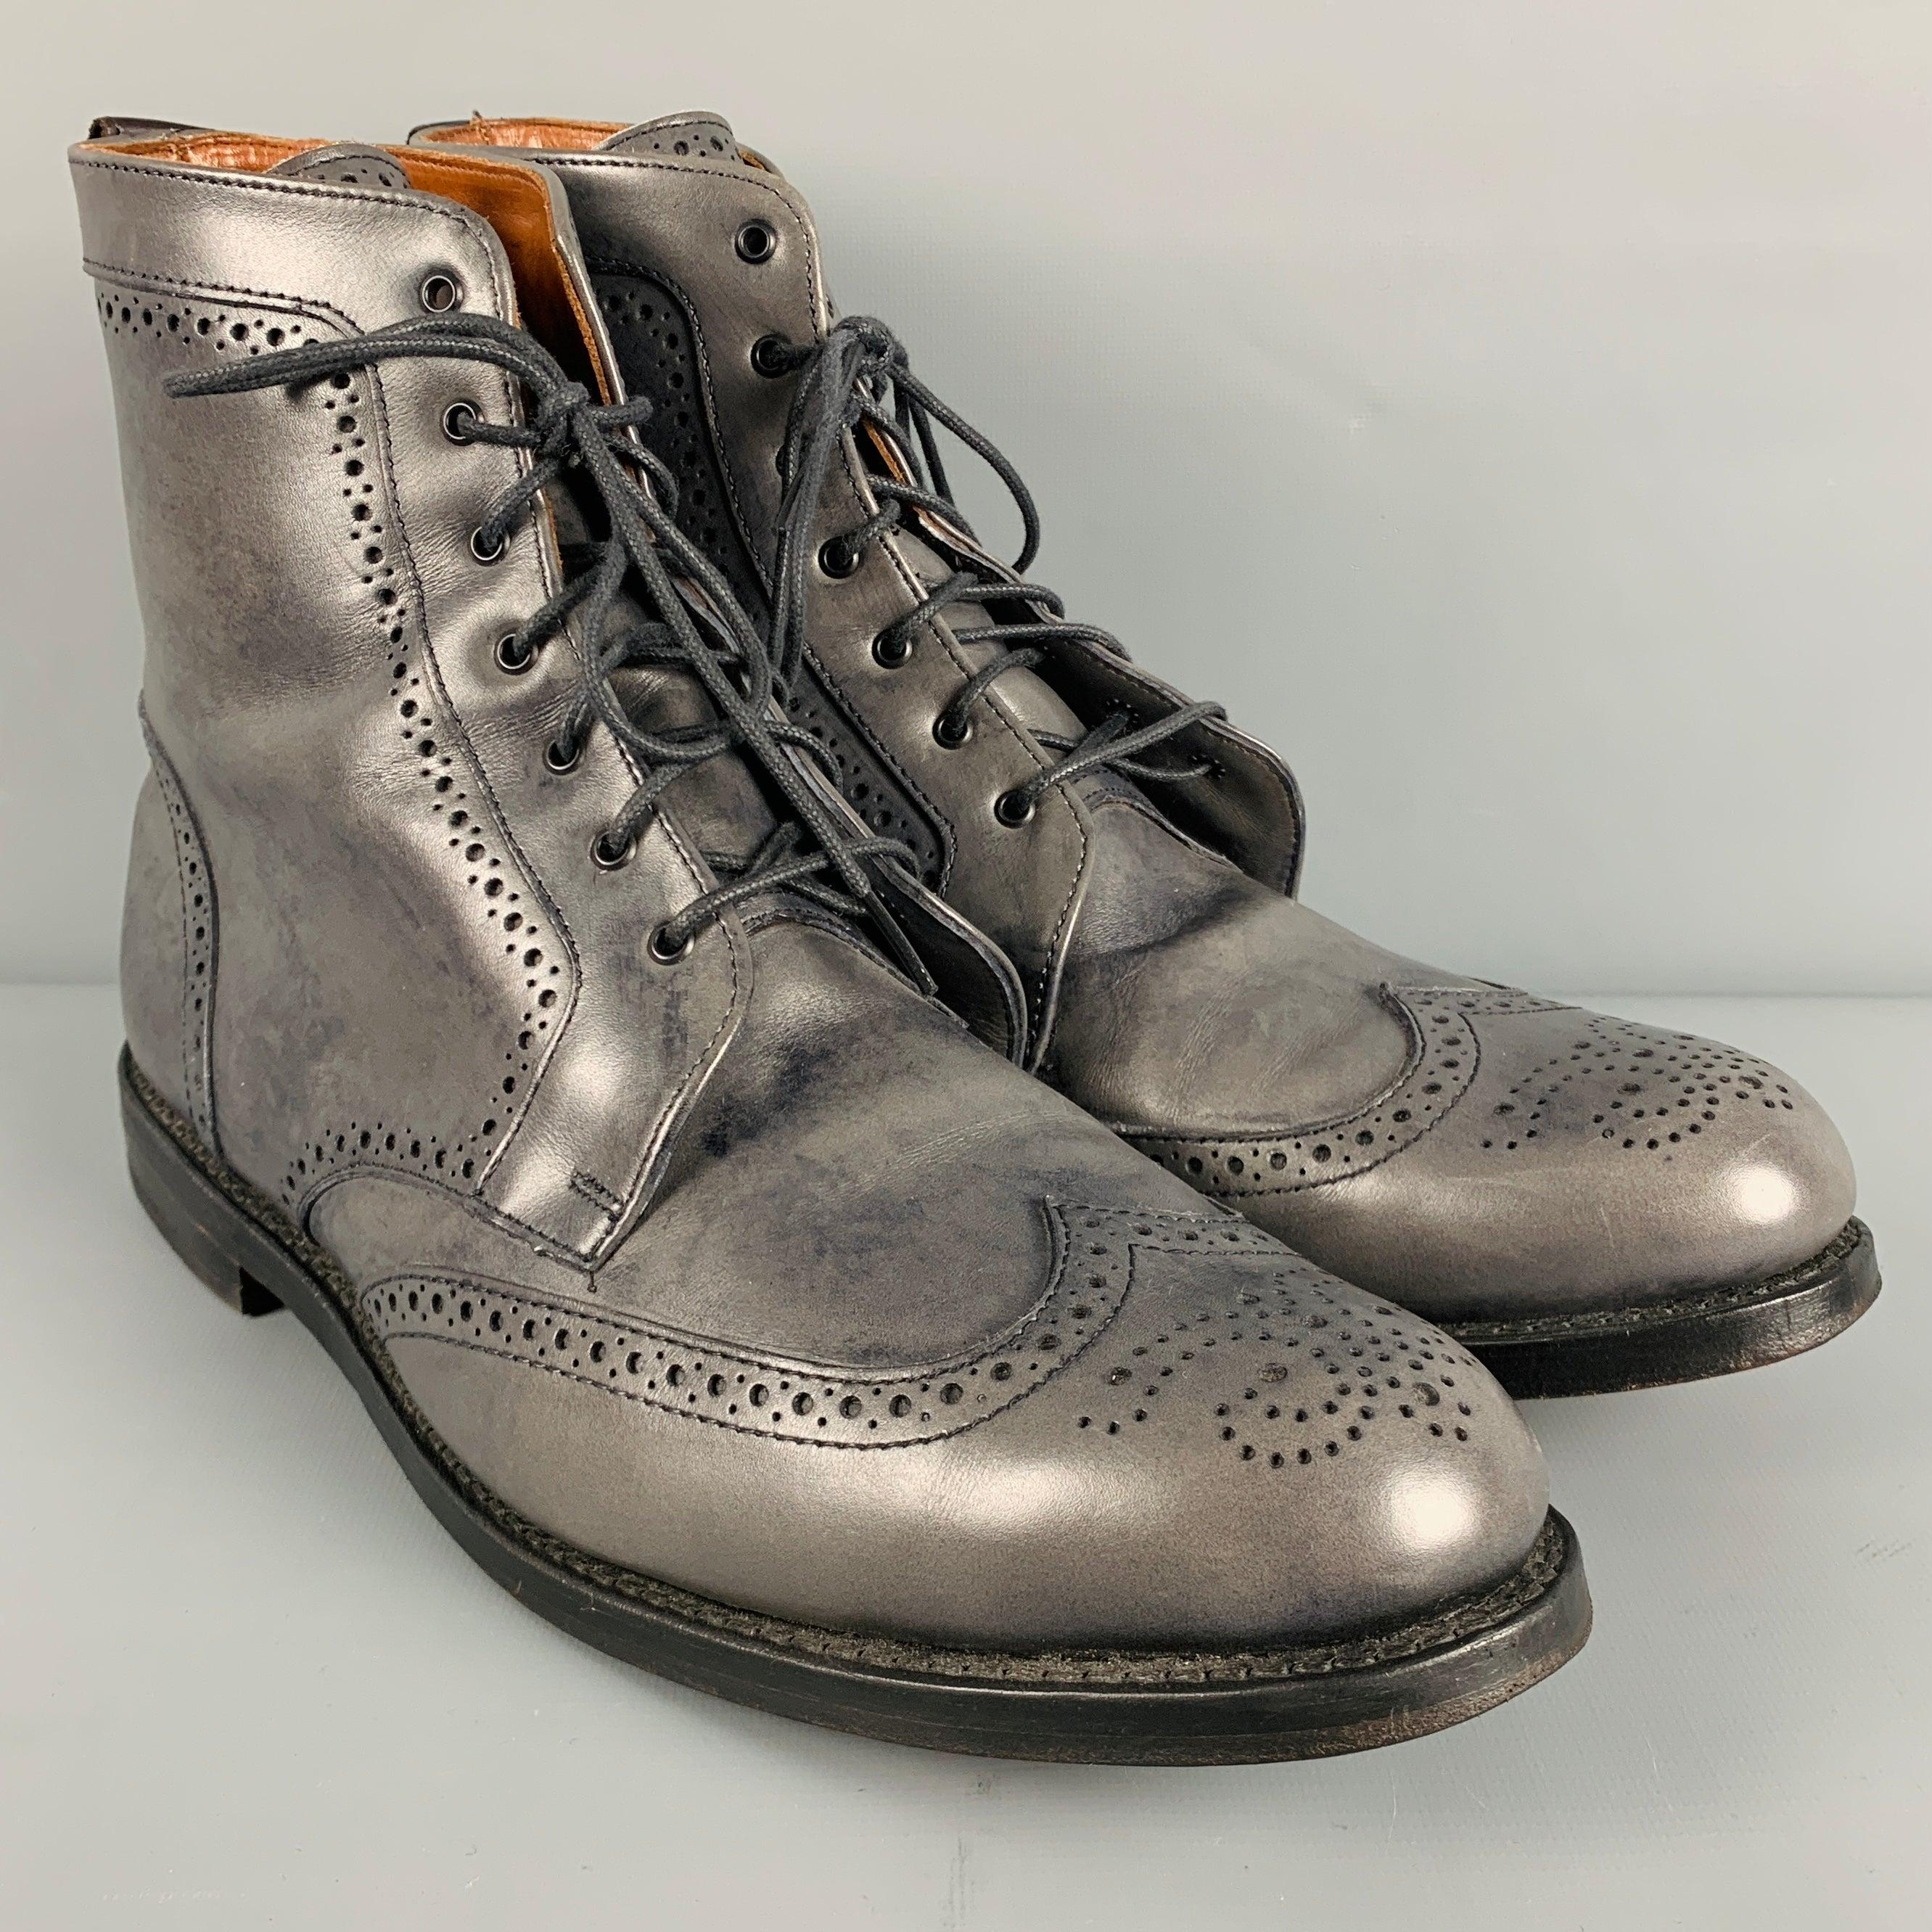 ALLEN EDMONDS boots
in a grey perforated leather featuring a wingtip style, and lace-up closure. Comes with dust bag.Excellent Pre-Owned Condition. 

Marked:   13 D 0110 28967 

Measurements: 
  Length: 12.75 inches Width: 4.25 inches Height: 8